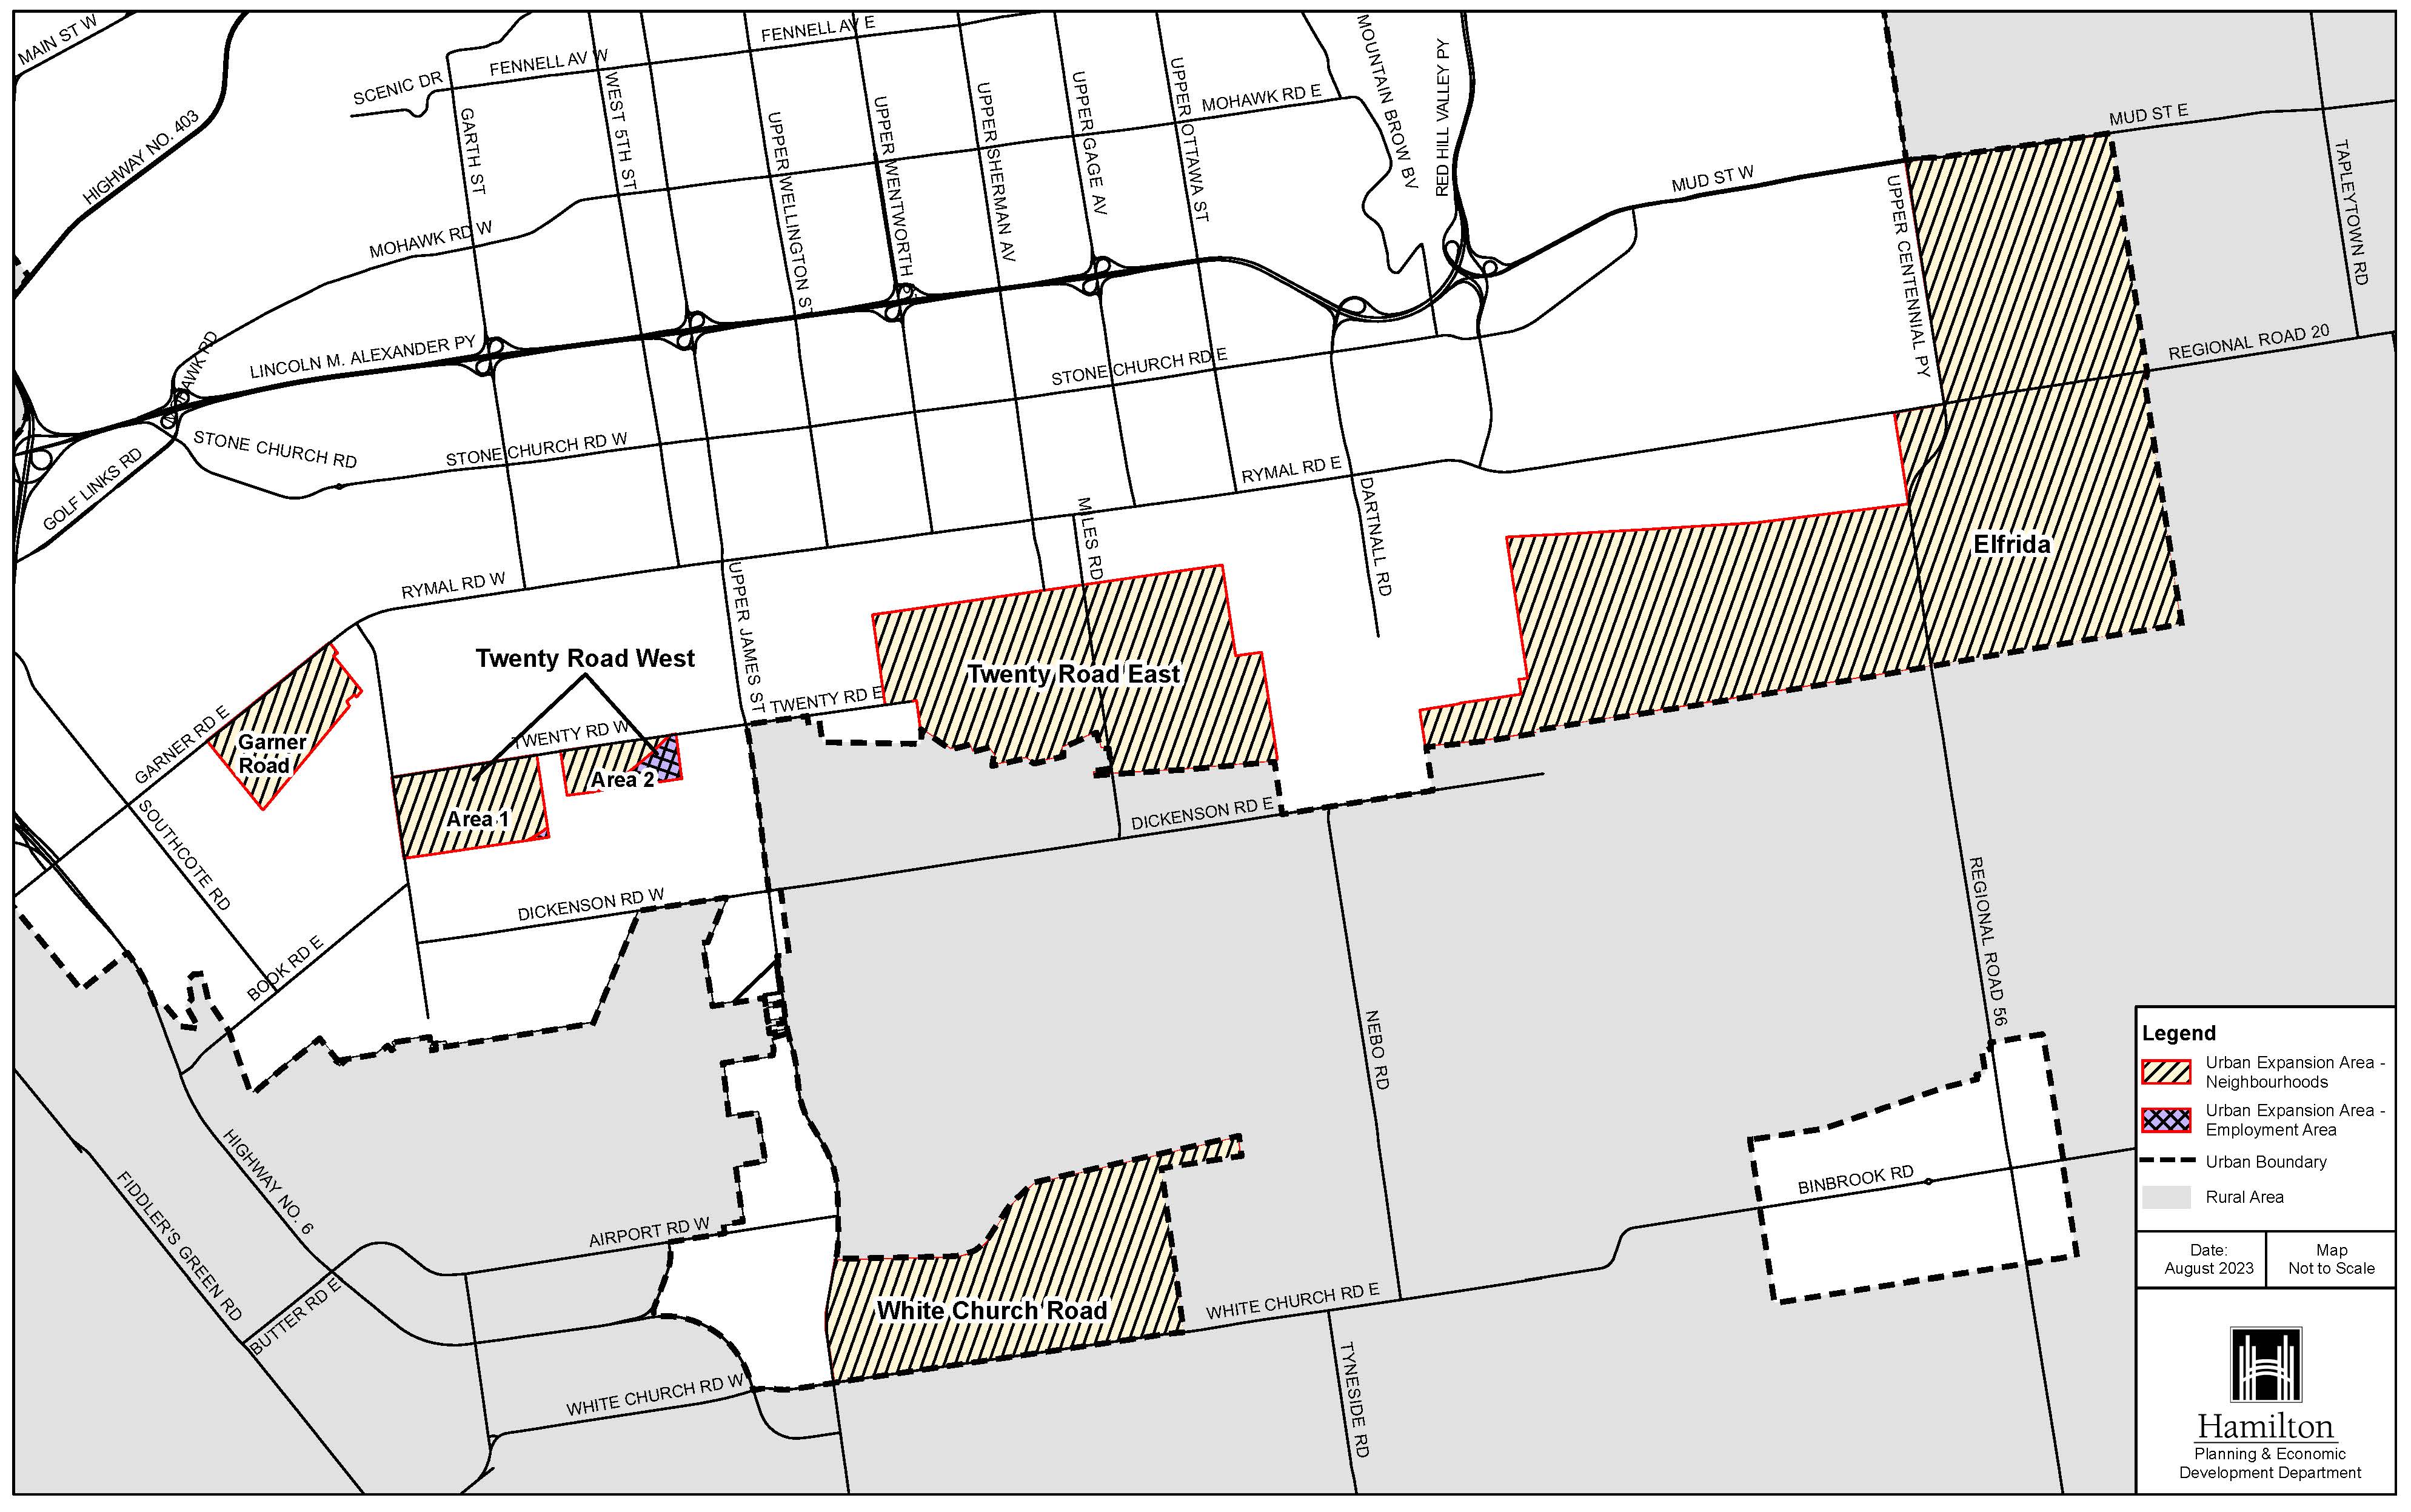 Map of Urban Expansion Areas in Hamilton